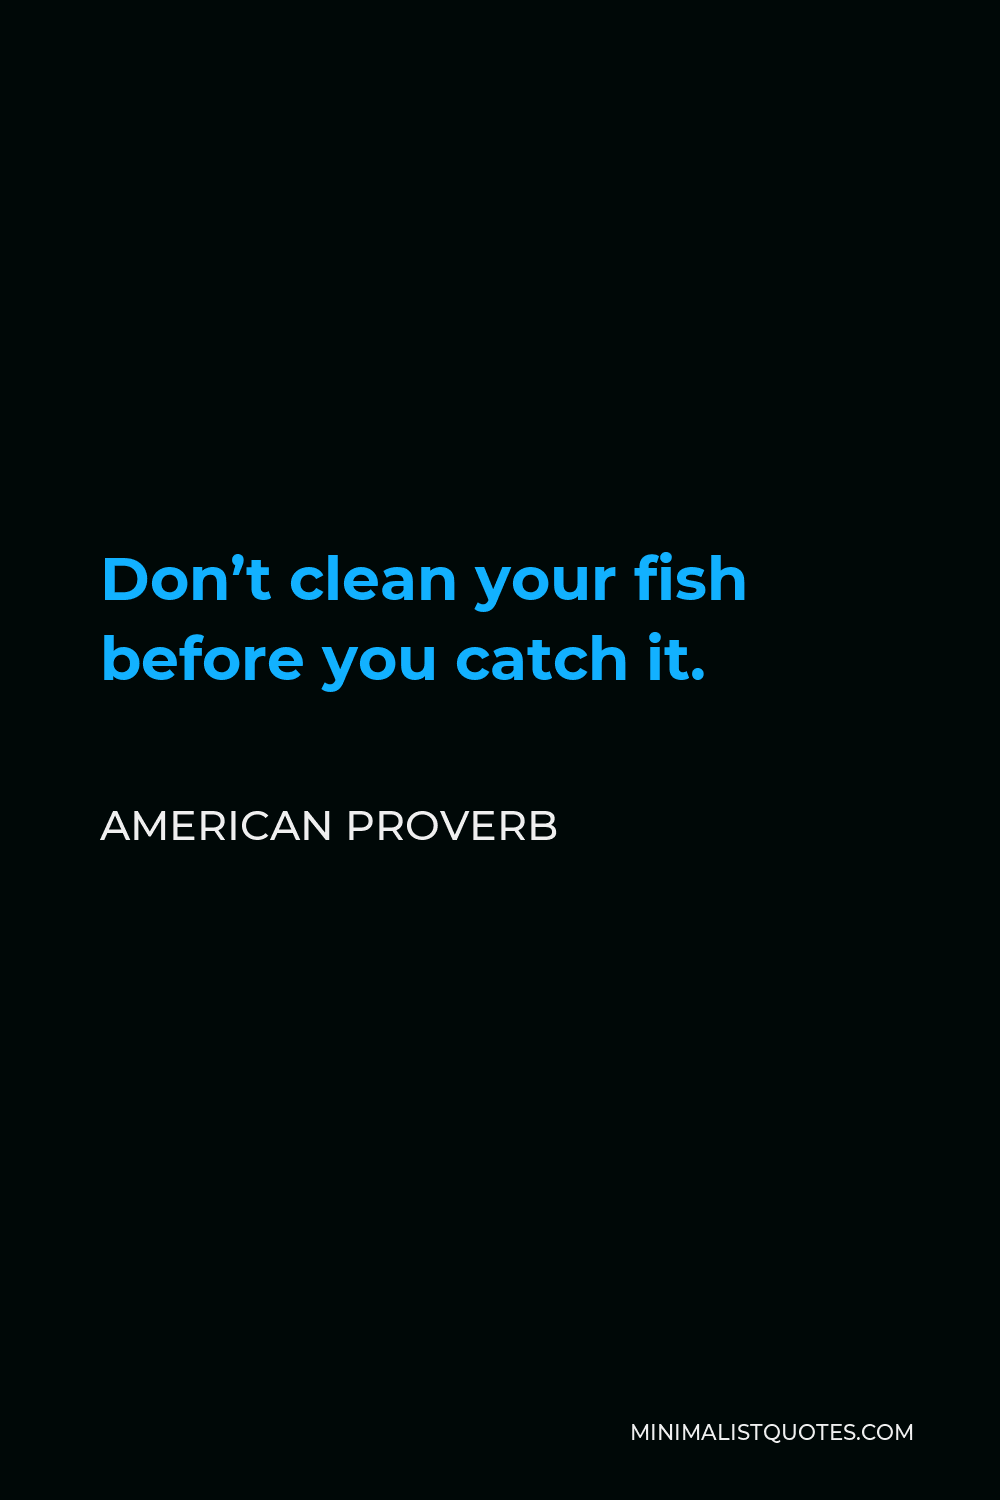 American Proverb Quote - Don’t clean your fish before you catch it.